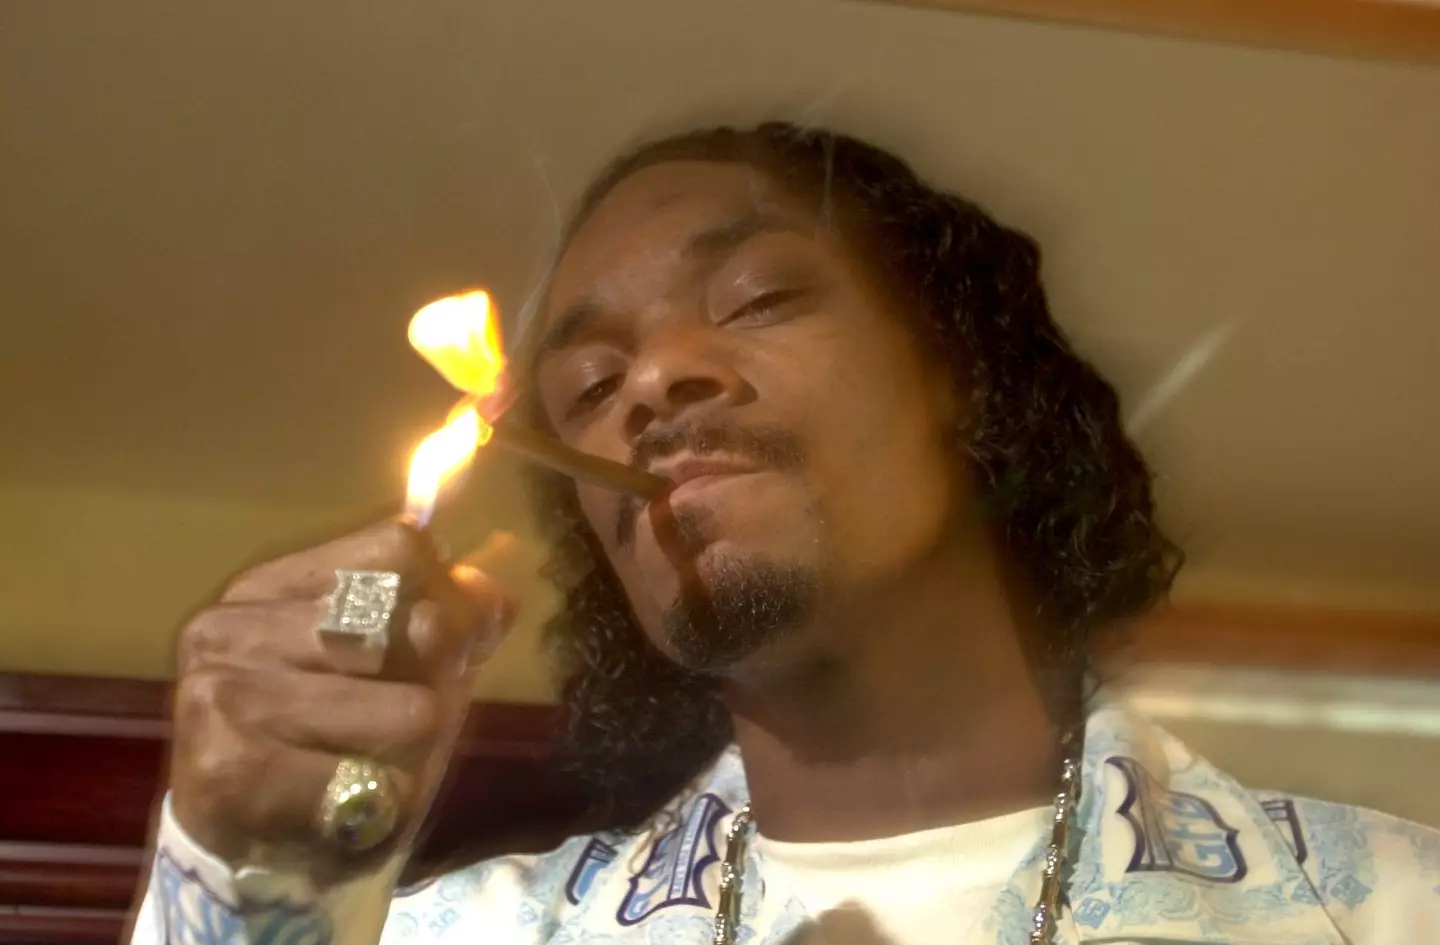 Snoop Dogg's professional joint roller said her hands are like 'little machines'.